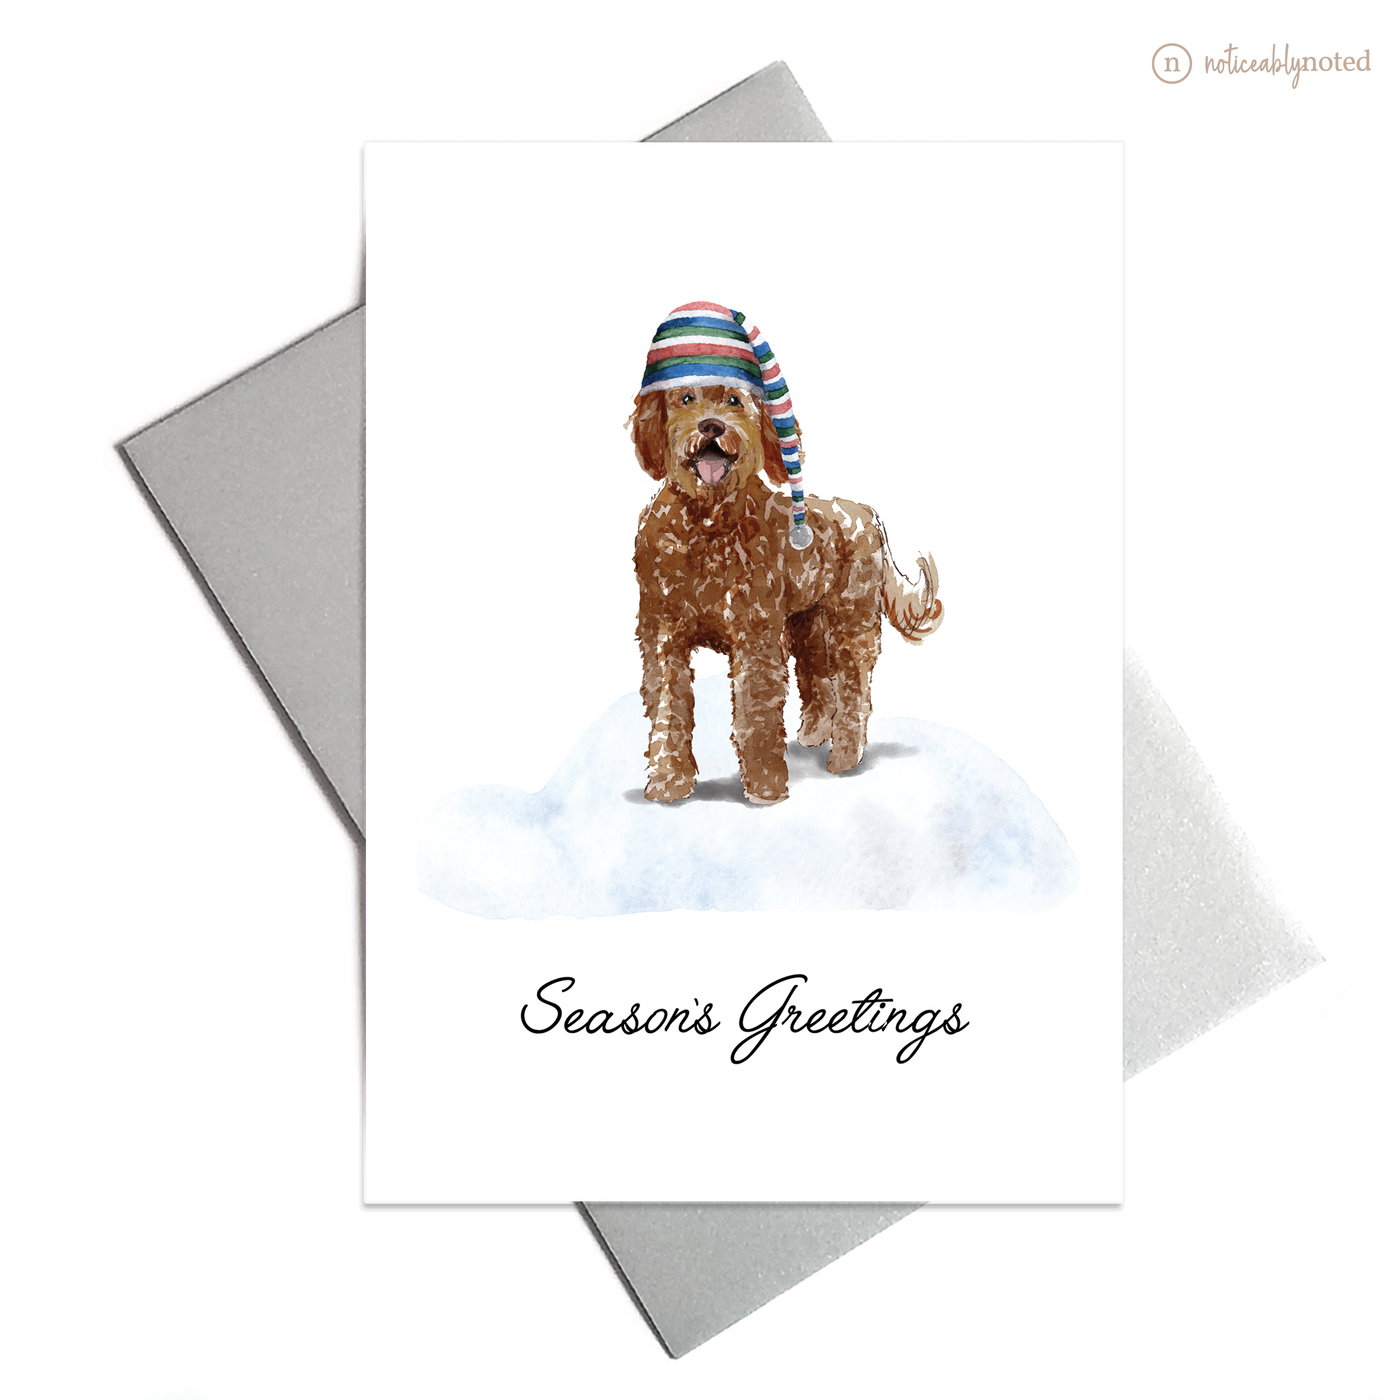 Labradoodle Dog Holiday Card | Noticeably Noted